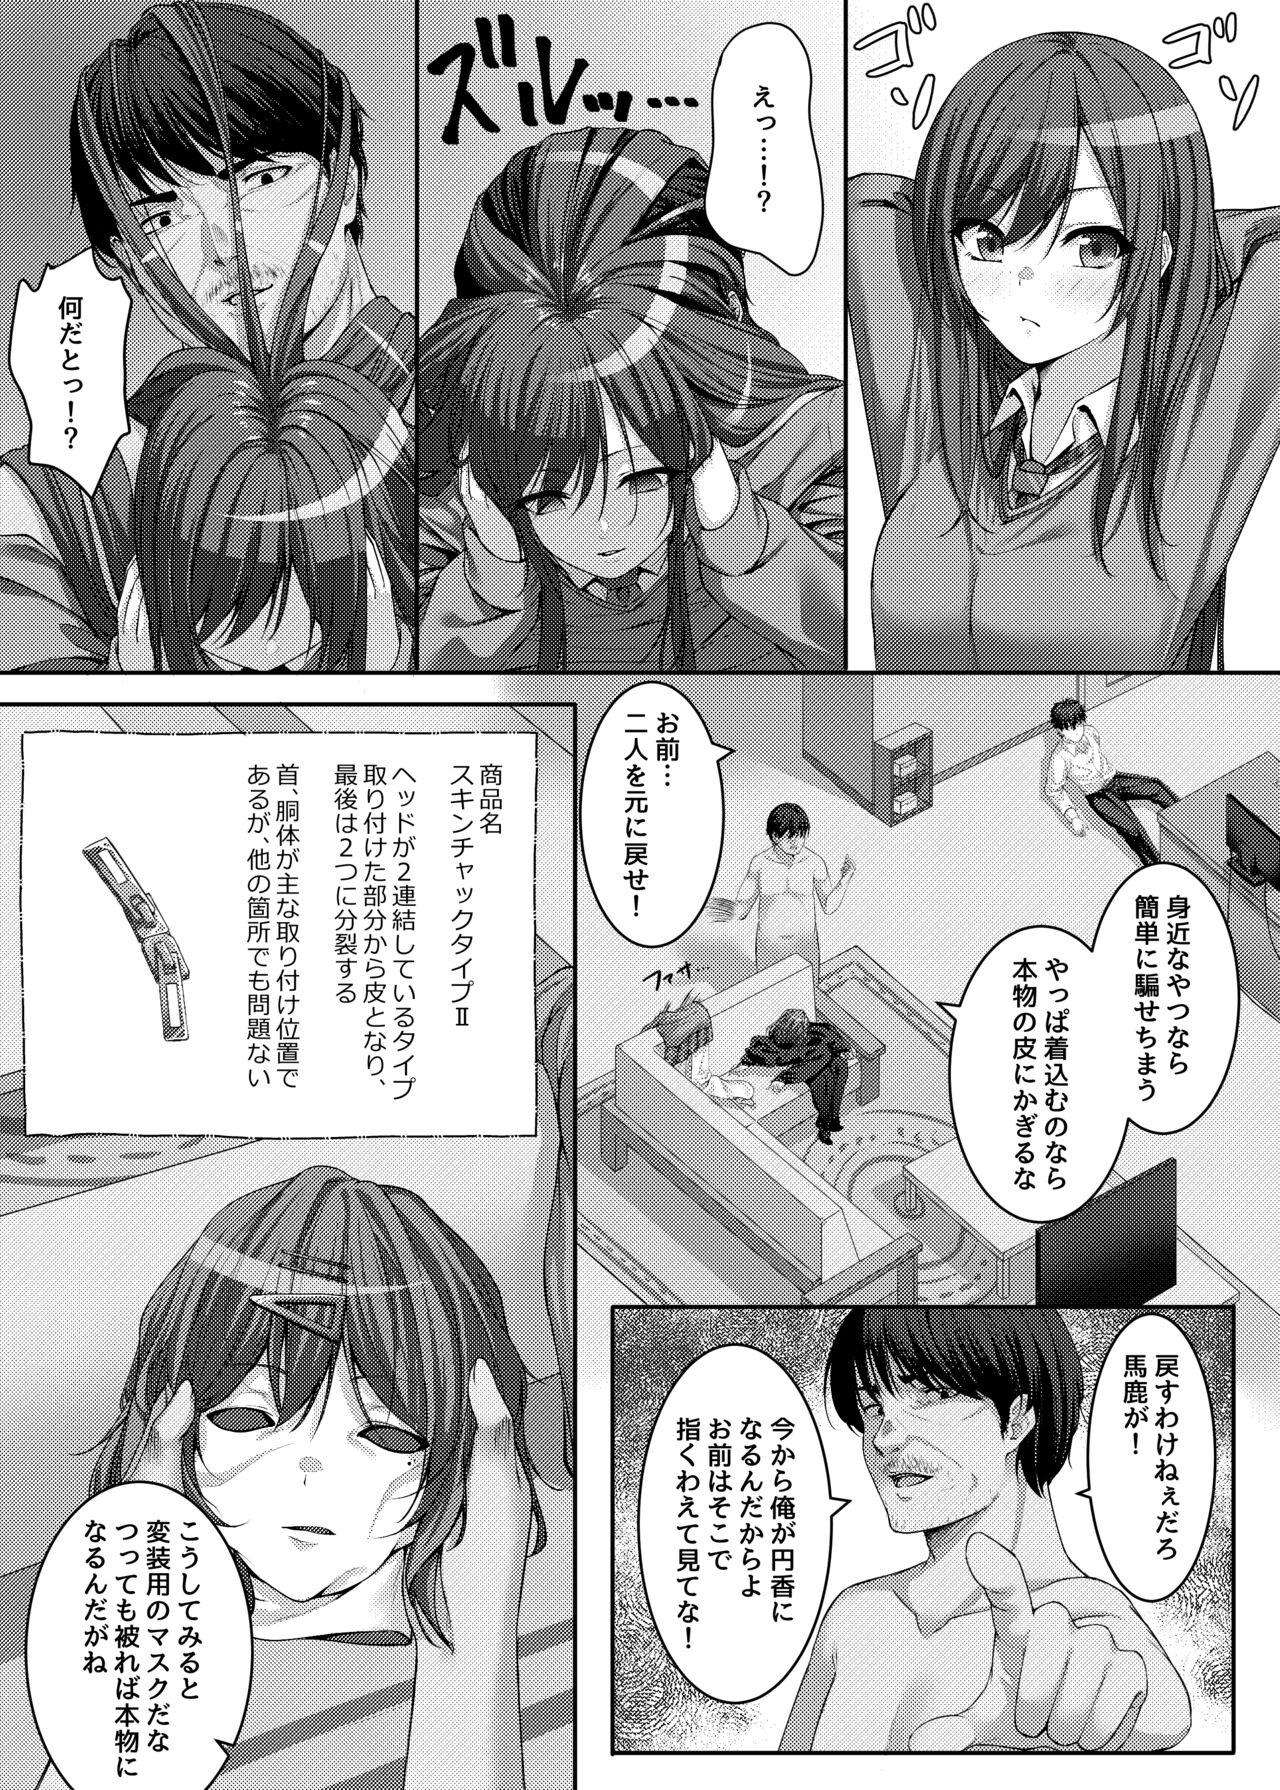 Hot Naked Women 移り皮り～円香編～ - The idolmaster Sloppy - Page 3